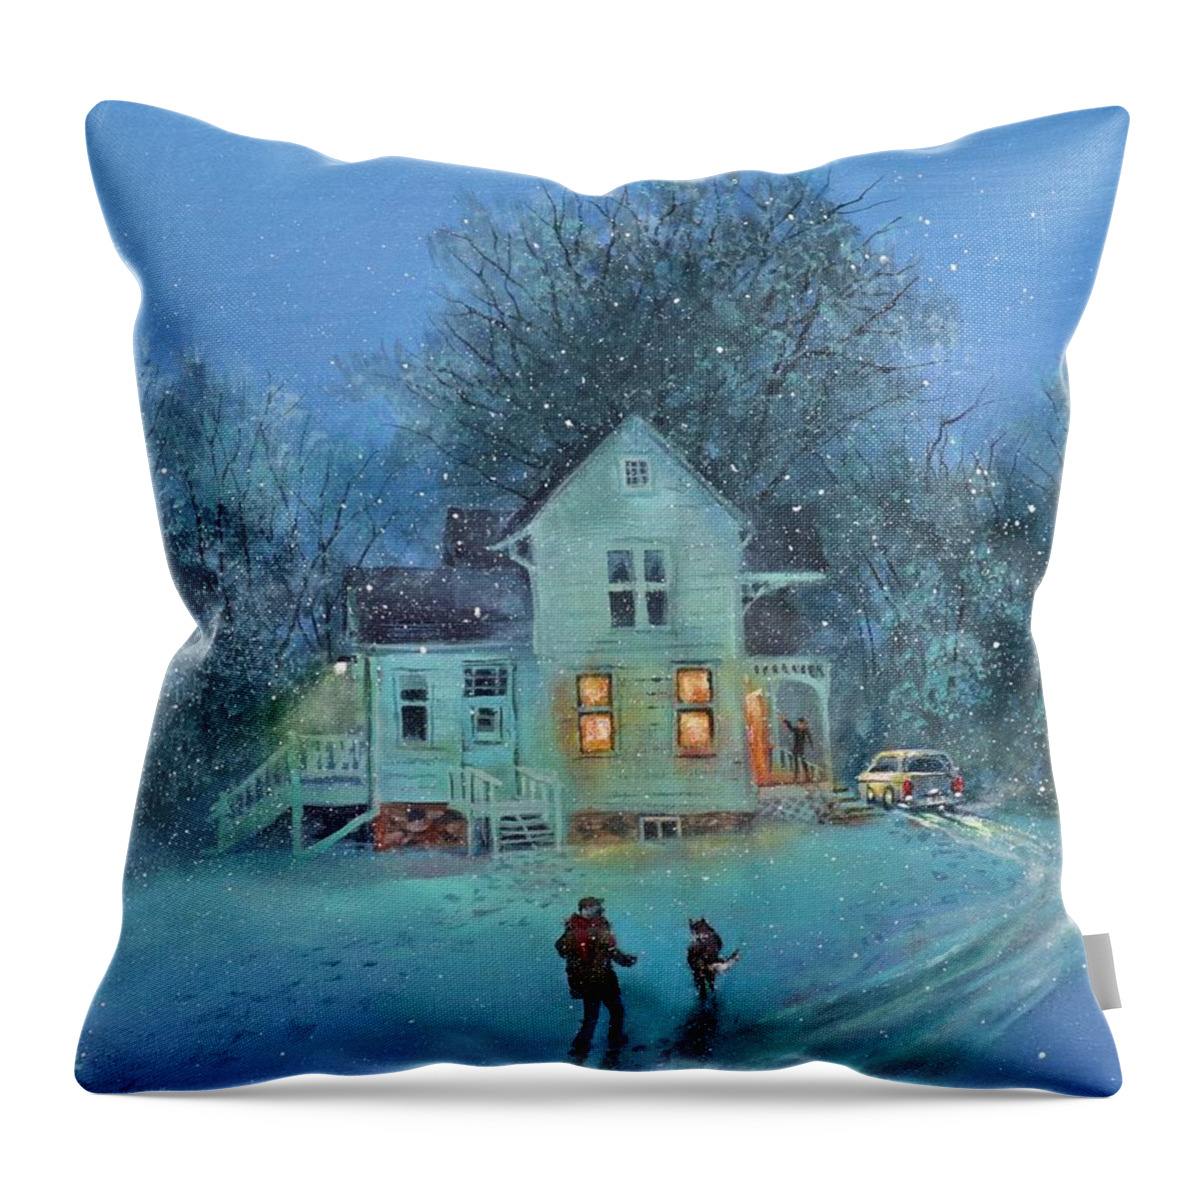 Winter Scene Throw Pillow featuring the painting Suppertime At The Farm by Tom Shropshire